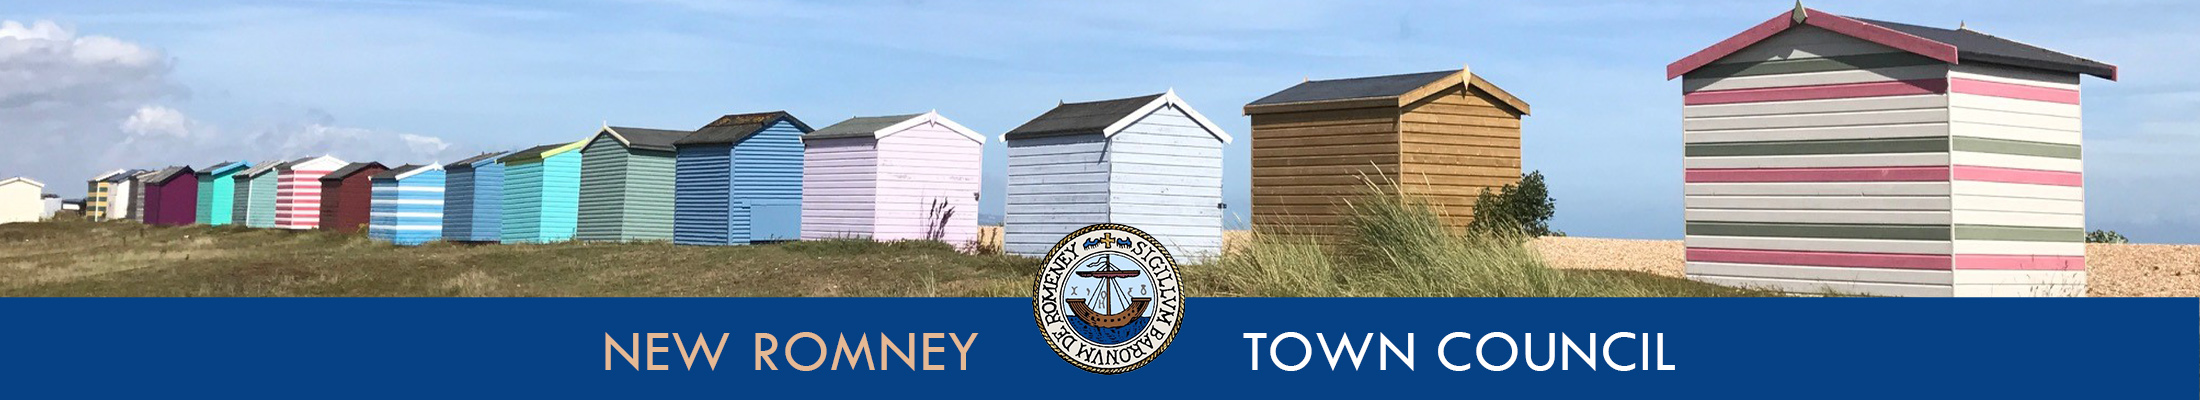 Header Image for New Romney Town Council